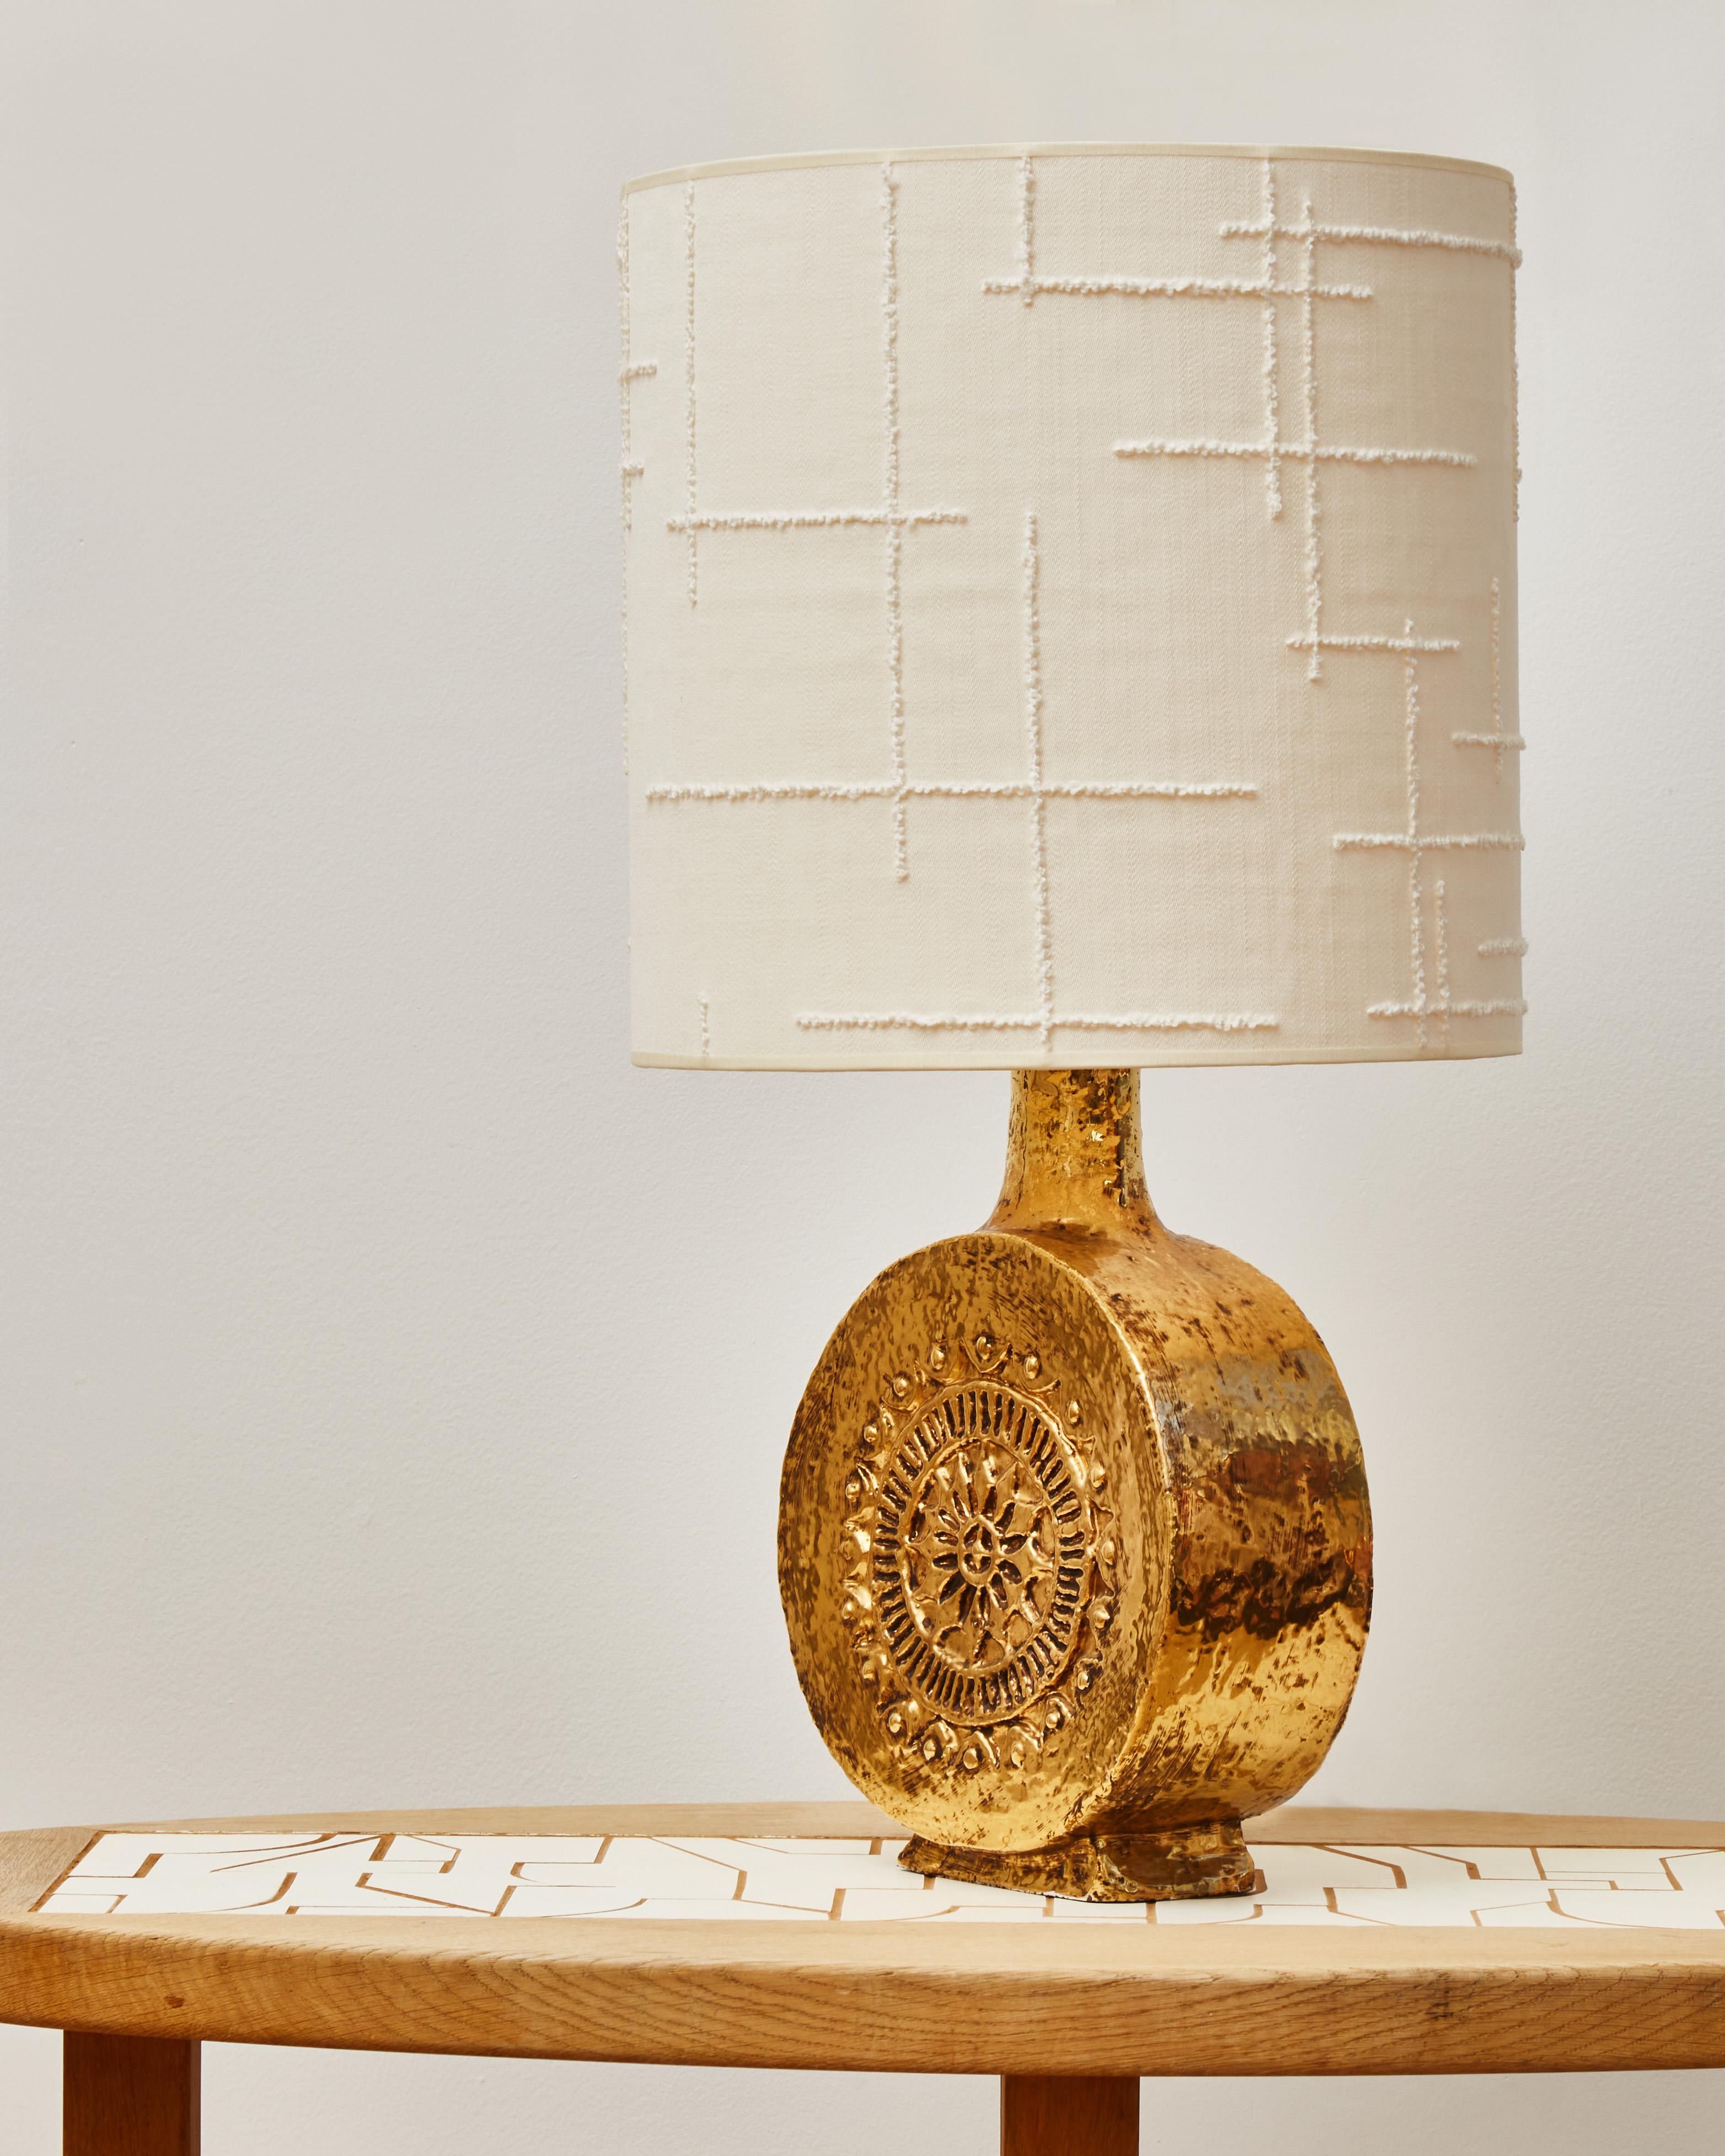 Decorative ceramic table lamp glazed with a beautiful gold layer beautifully reflecting the light. Topped here with a new lampshade made of Dedar fabric.